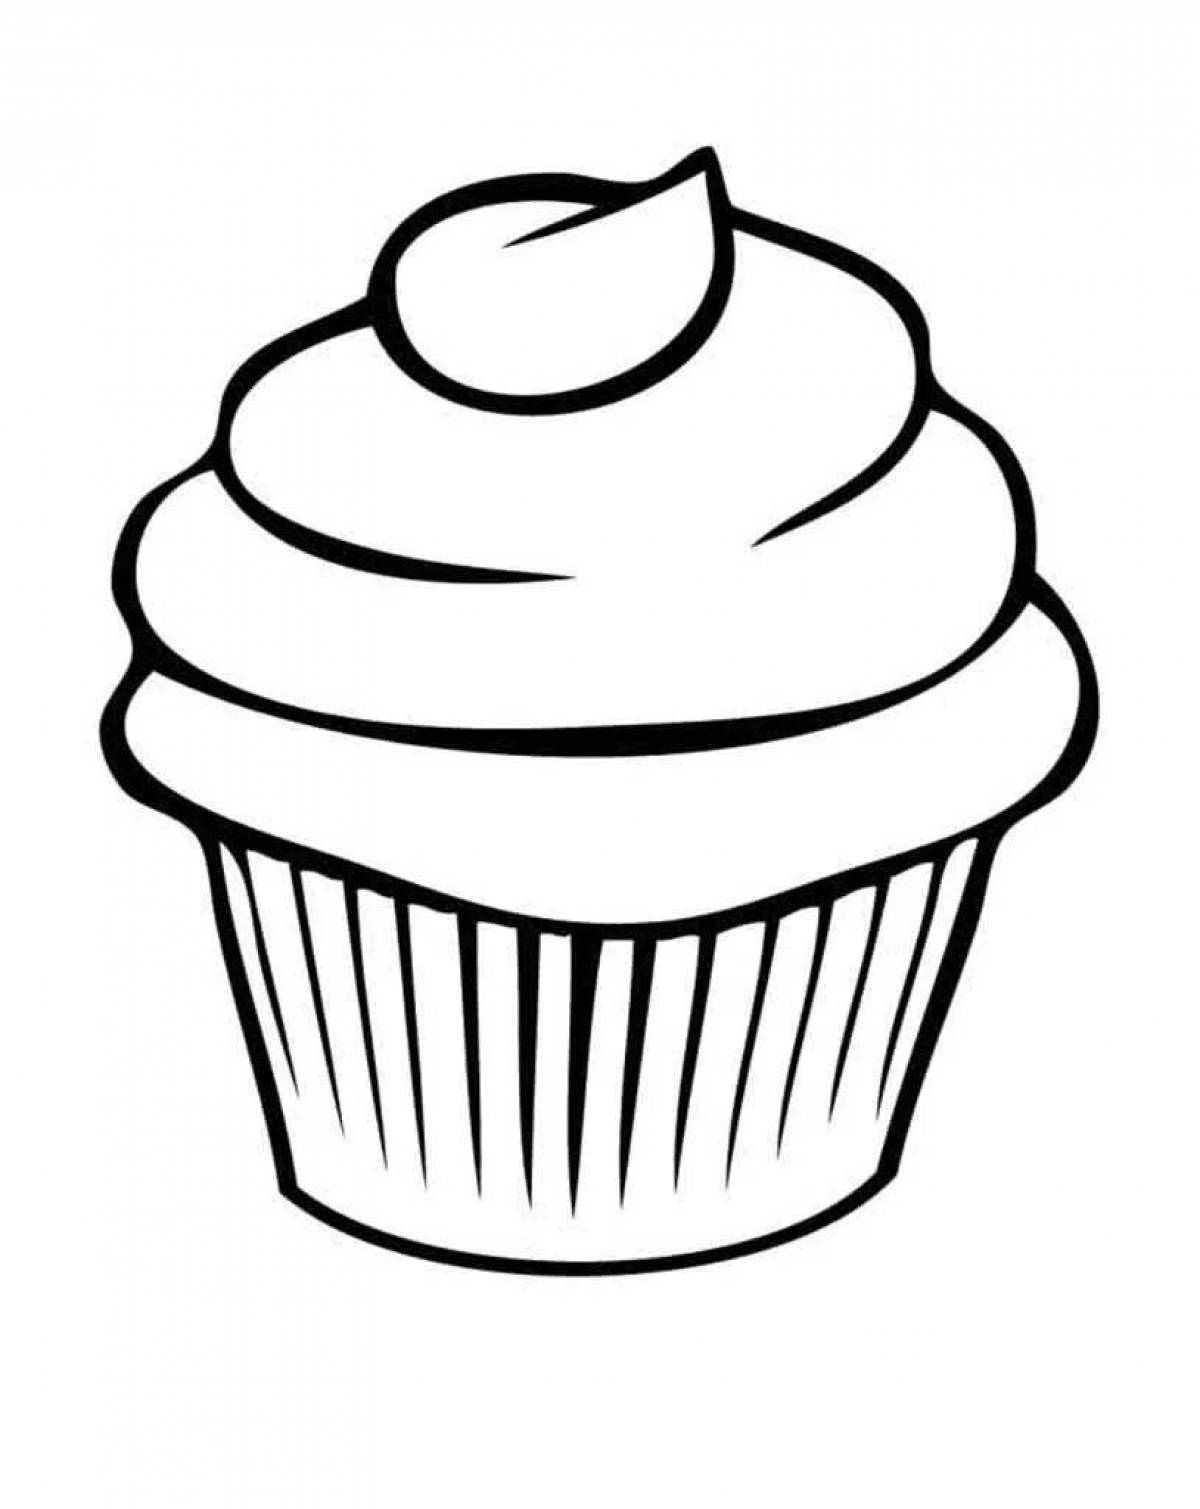 Attractive sweets coloring page